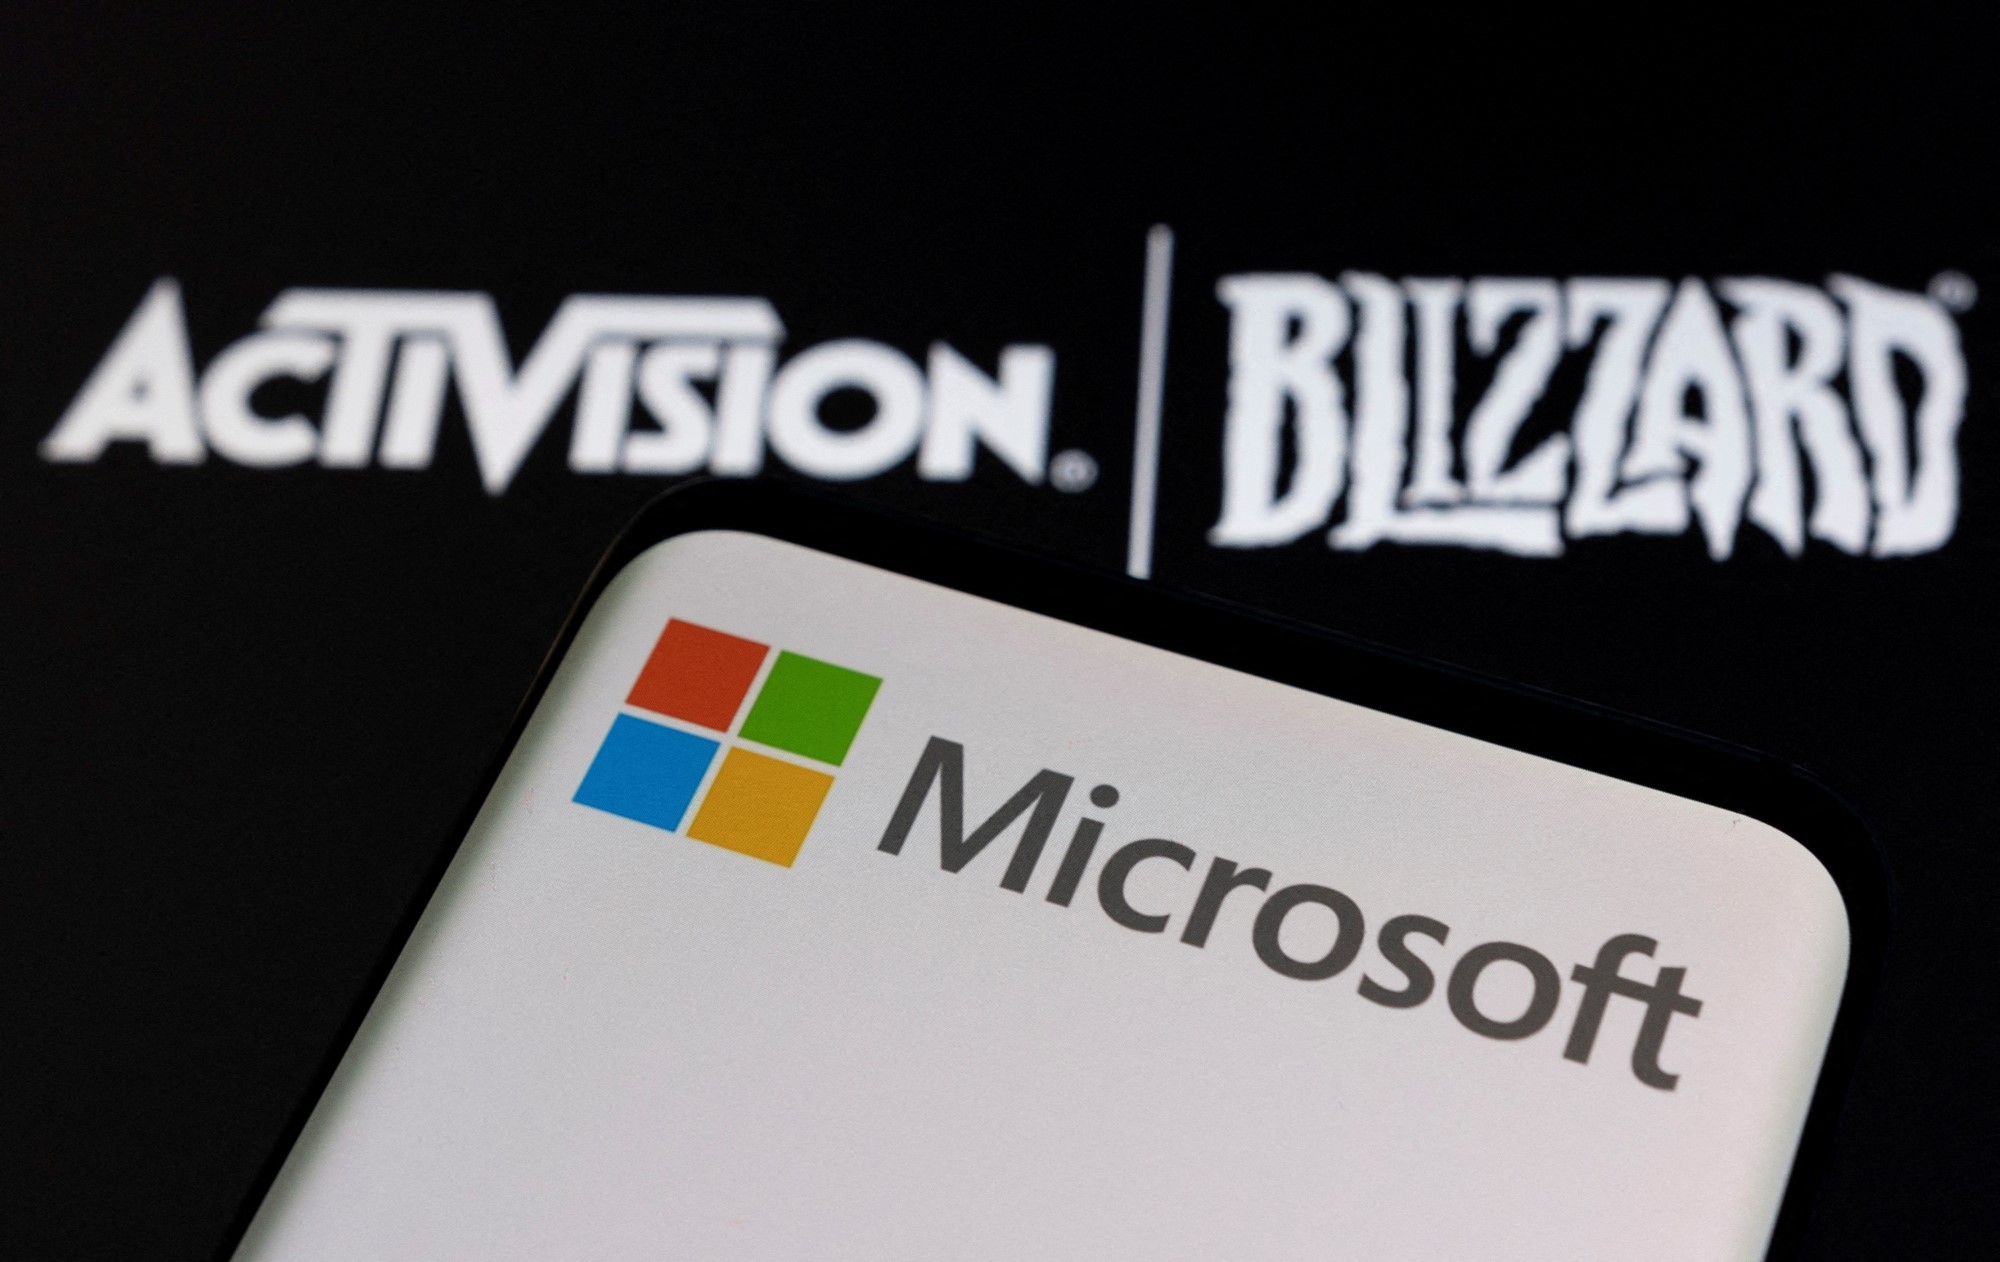 A phone displaying the Microsoft logo, in front of the Activision and Blizzard logos behind